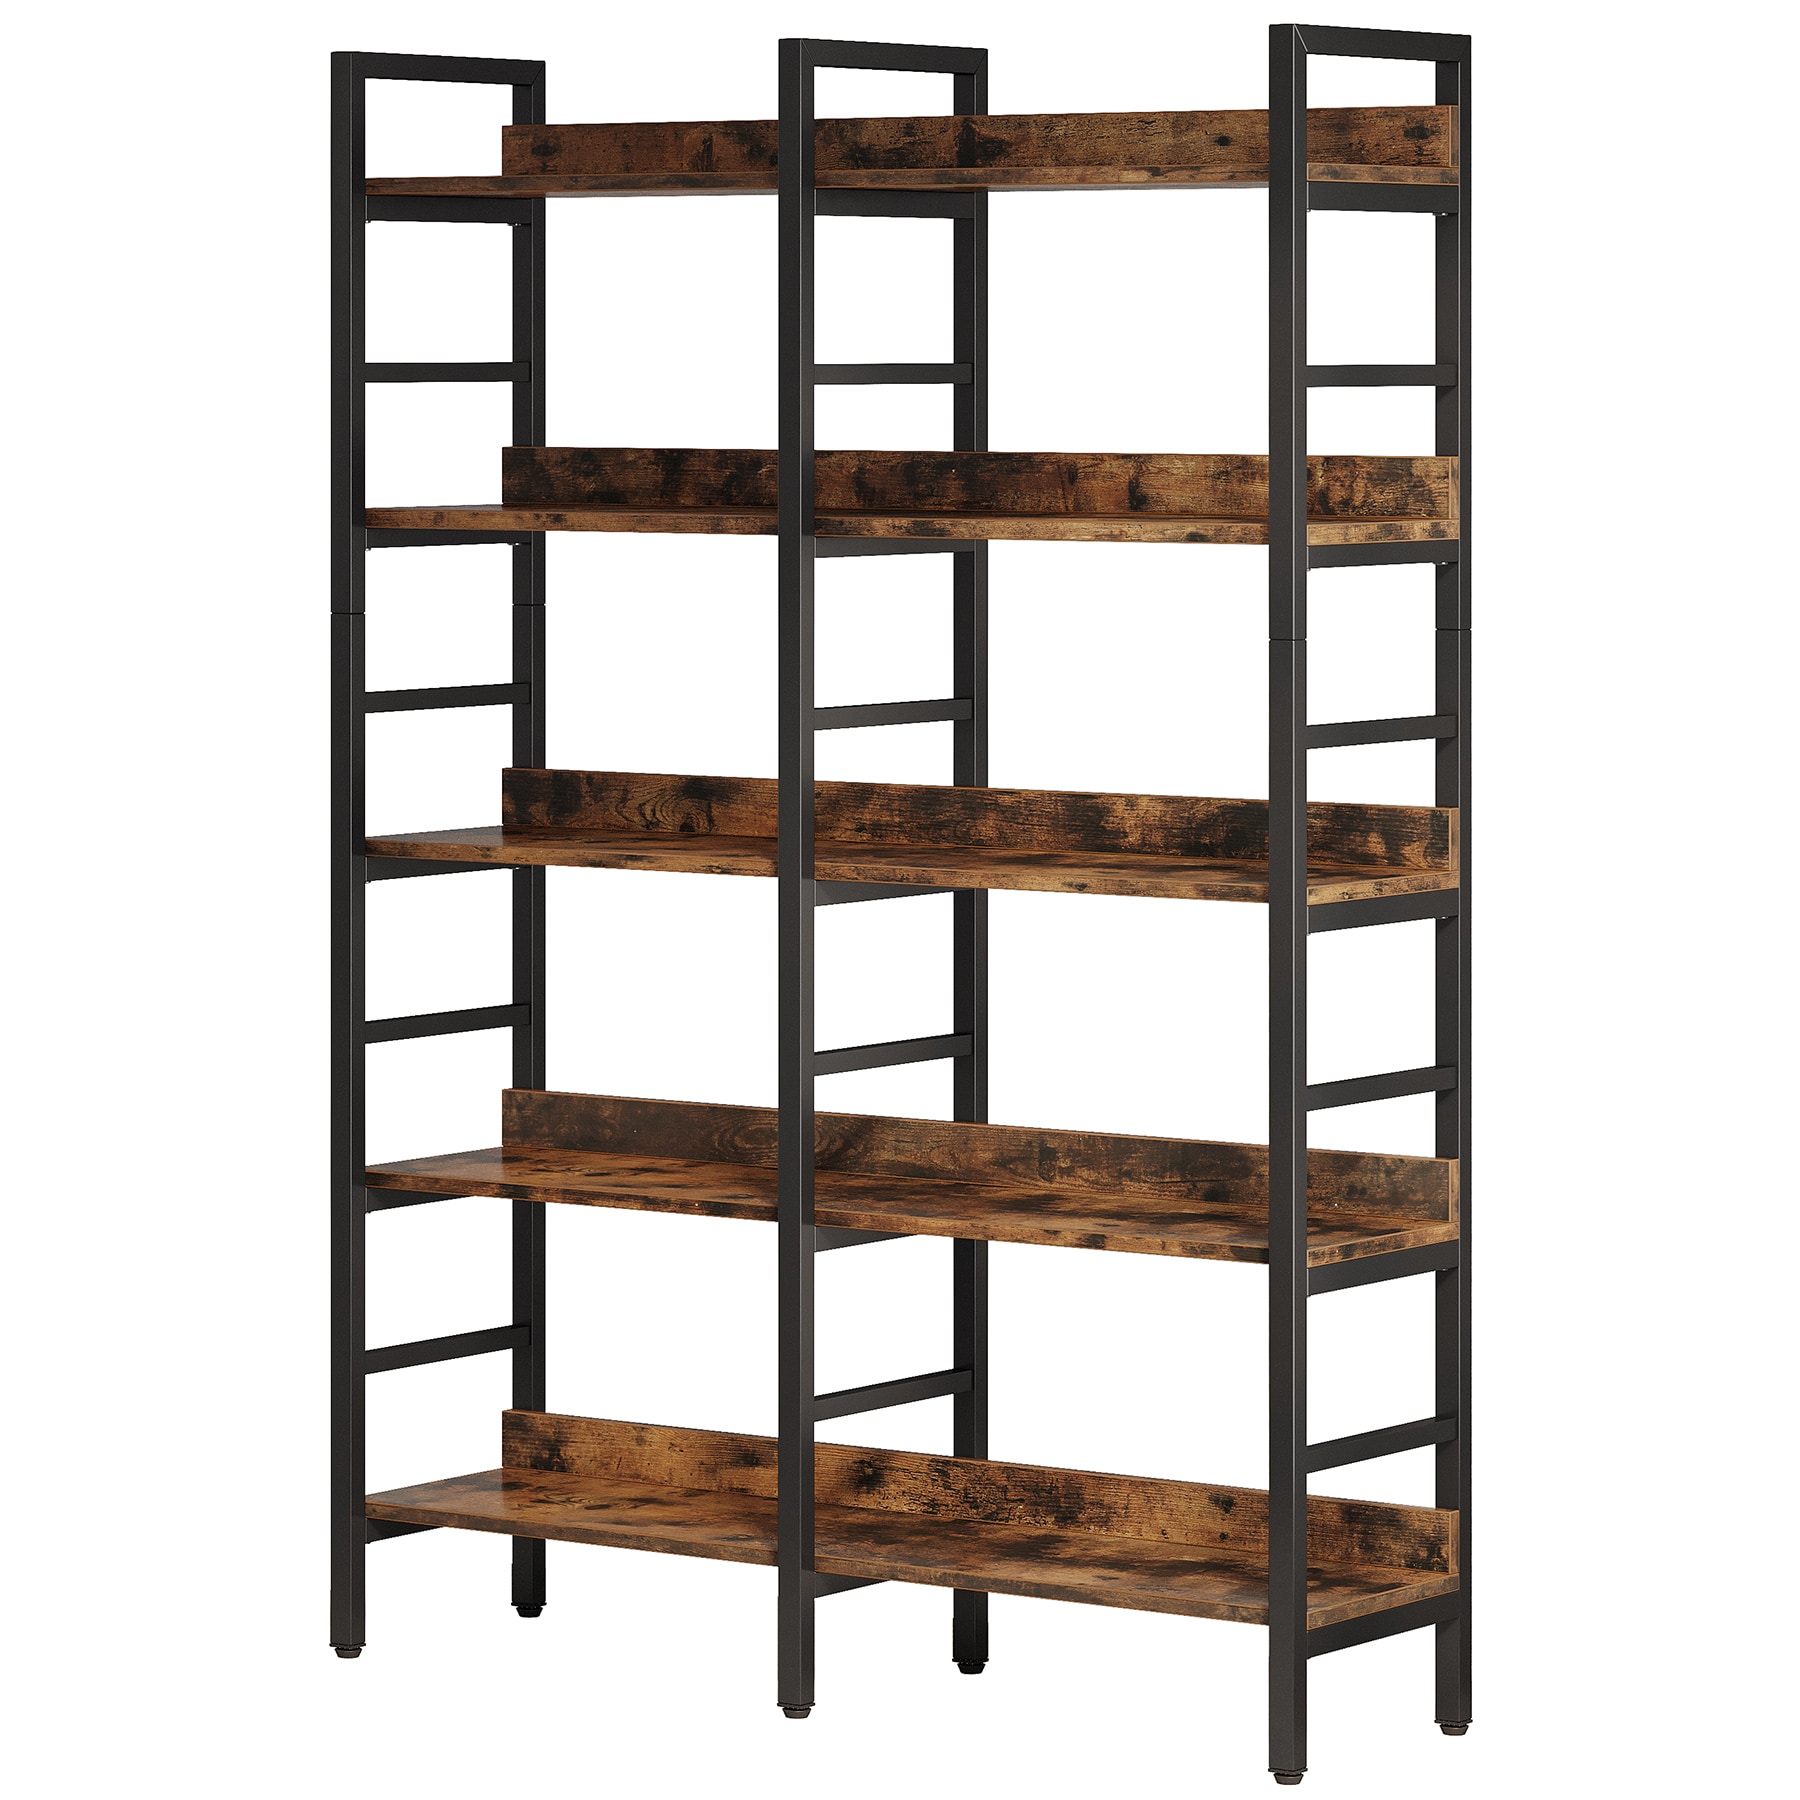 Stainless Steel W Shelf by Diversified Spaces, Industrial & Vocational  Arts Furniture